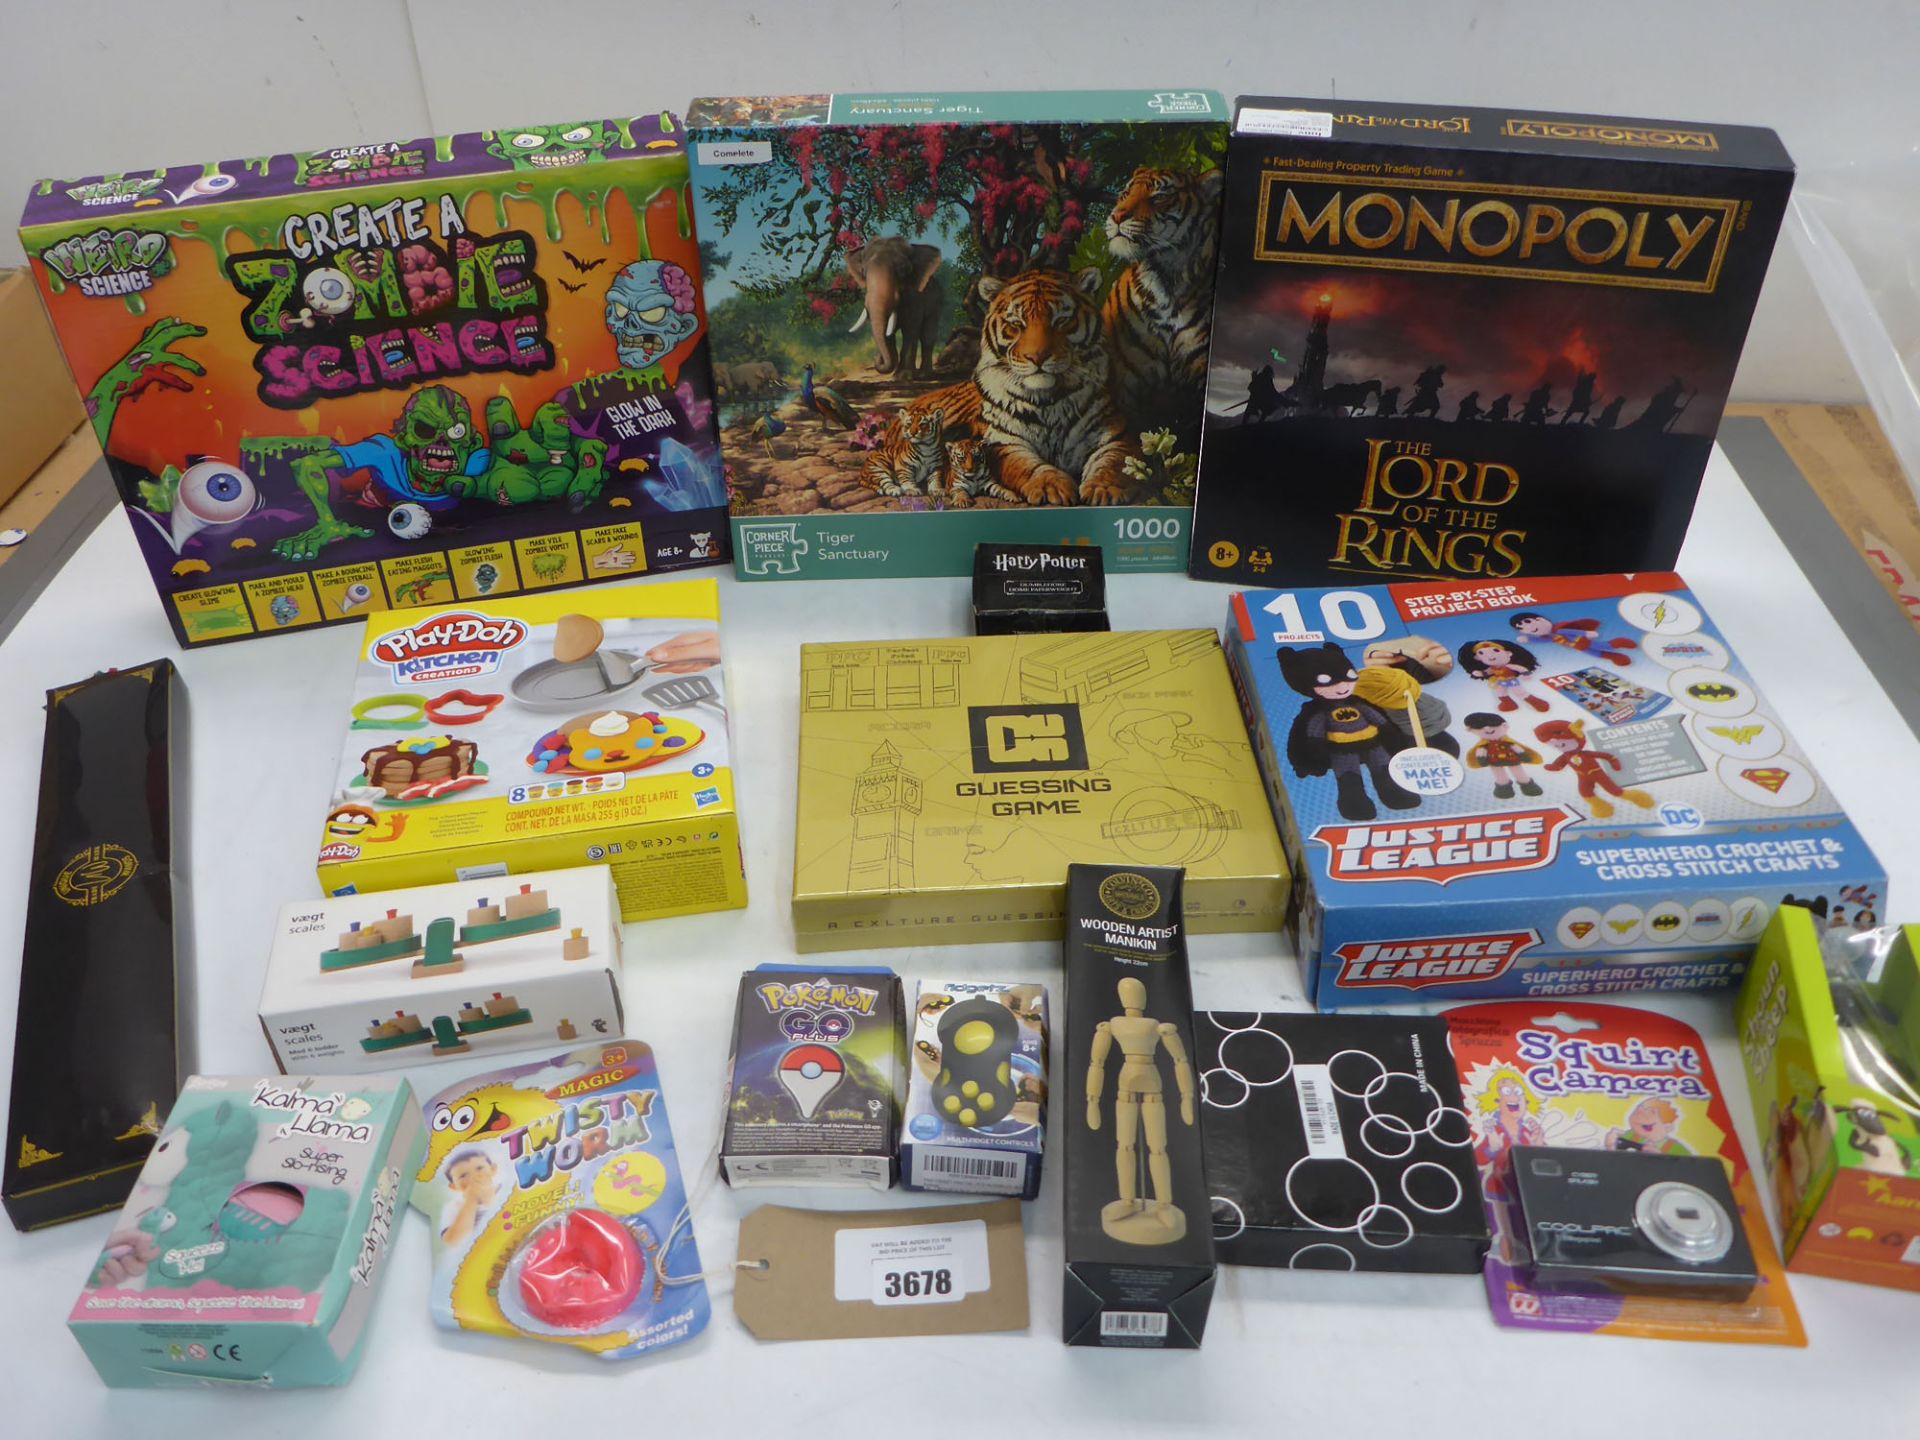 3678 Selection of games including Lord of the Rings Monopoly, Zombie Science, Play-Doh, Guessing